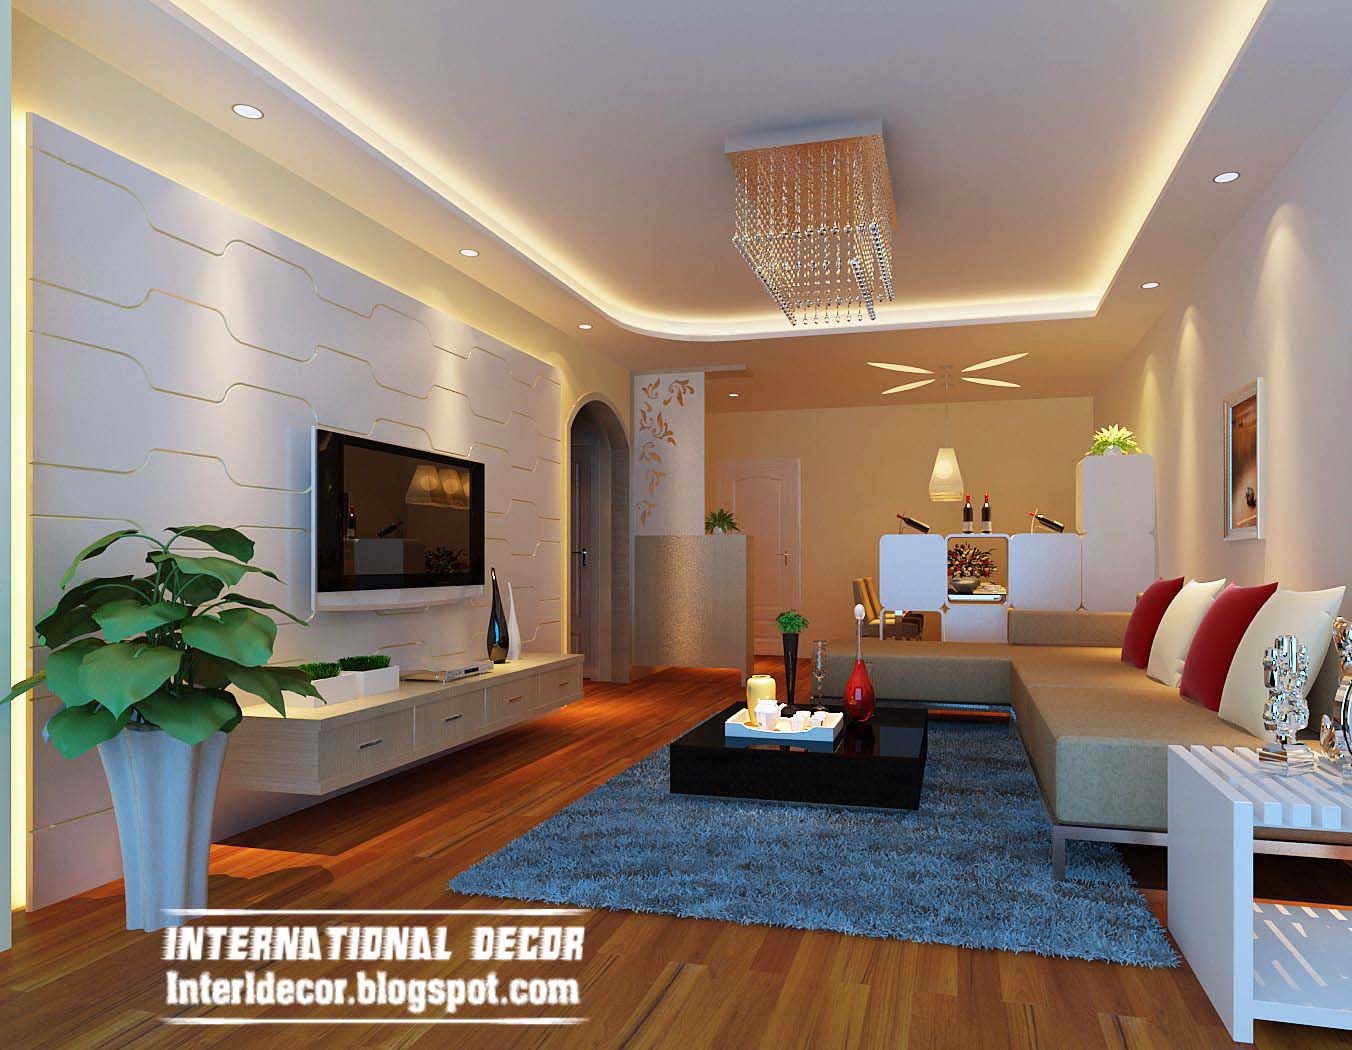 suspended ceiling tiles, lighting, systems pop designs for living room ...